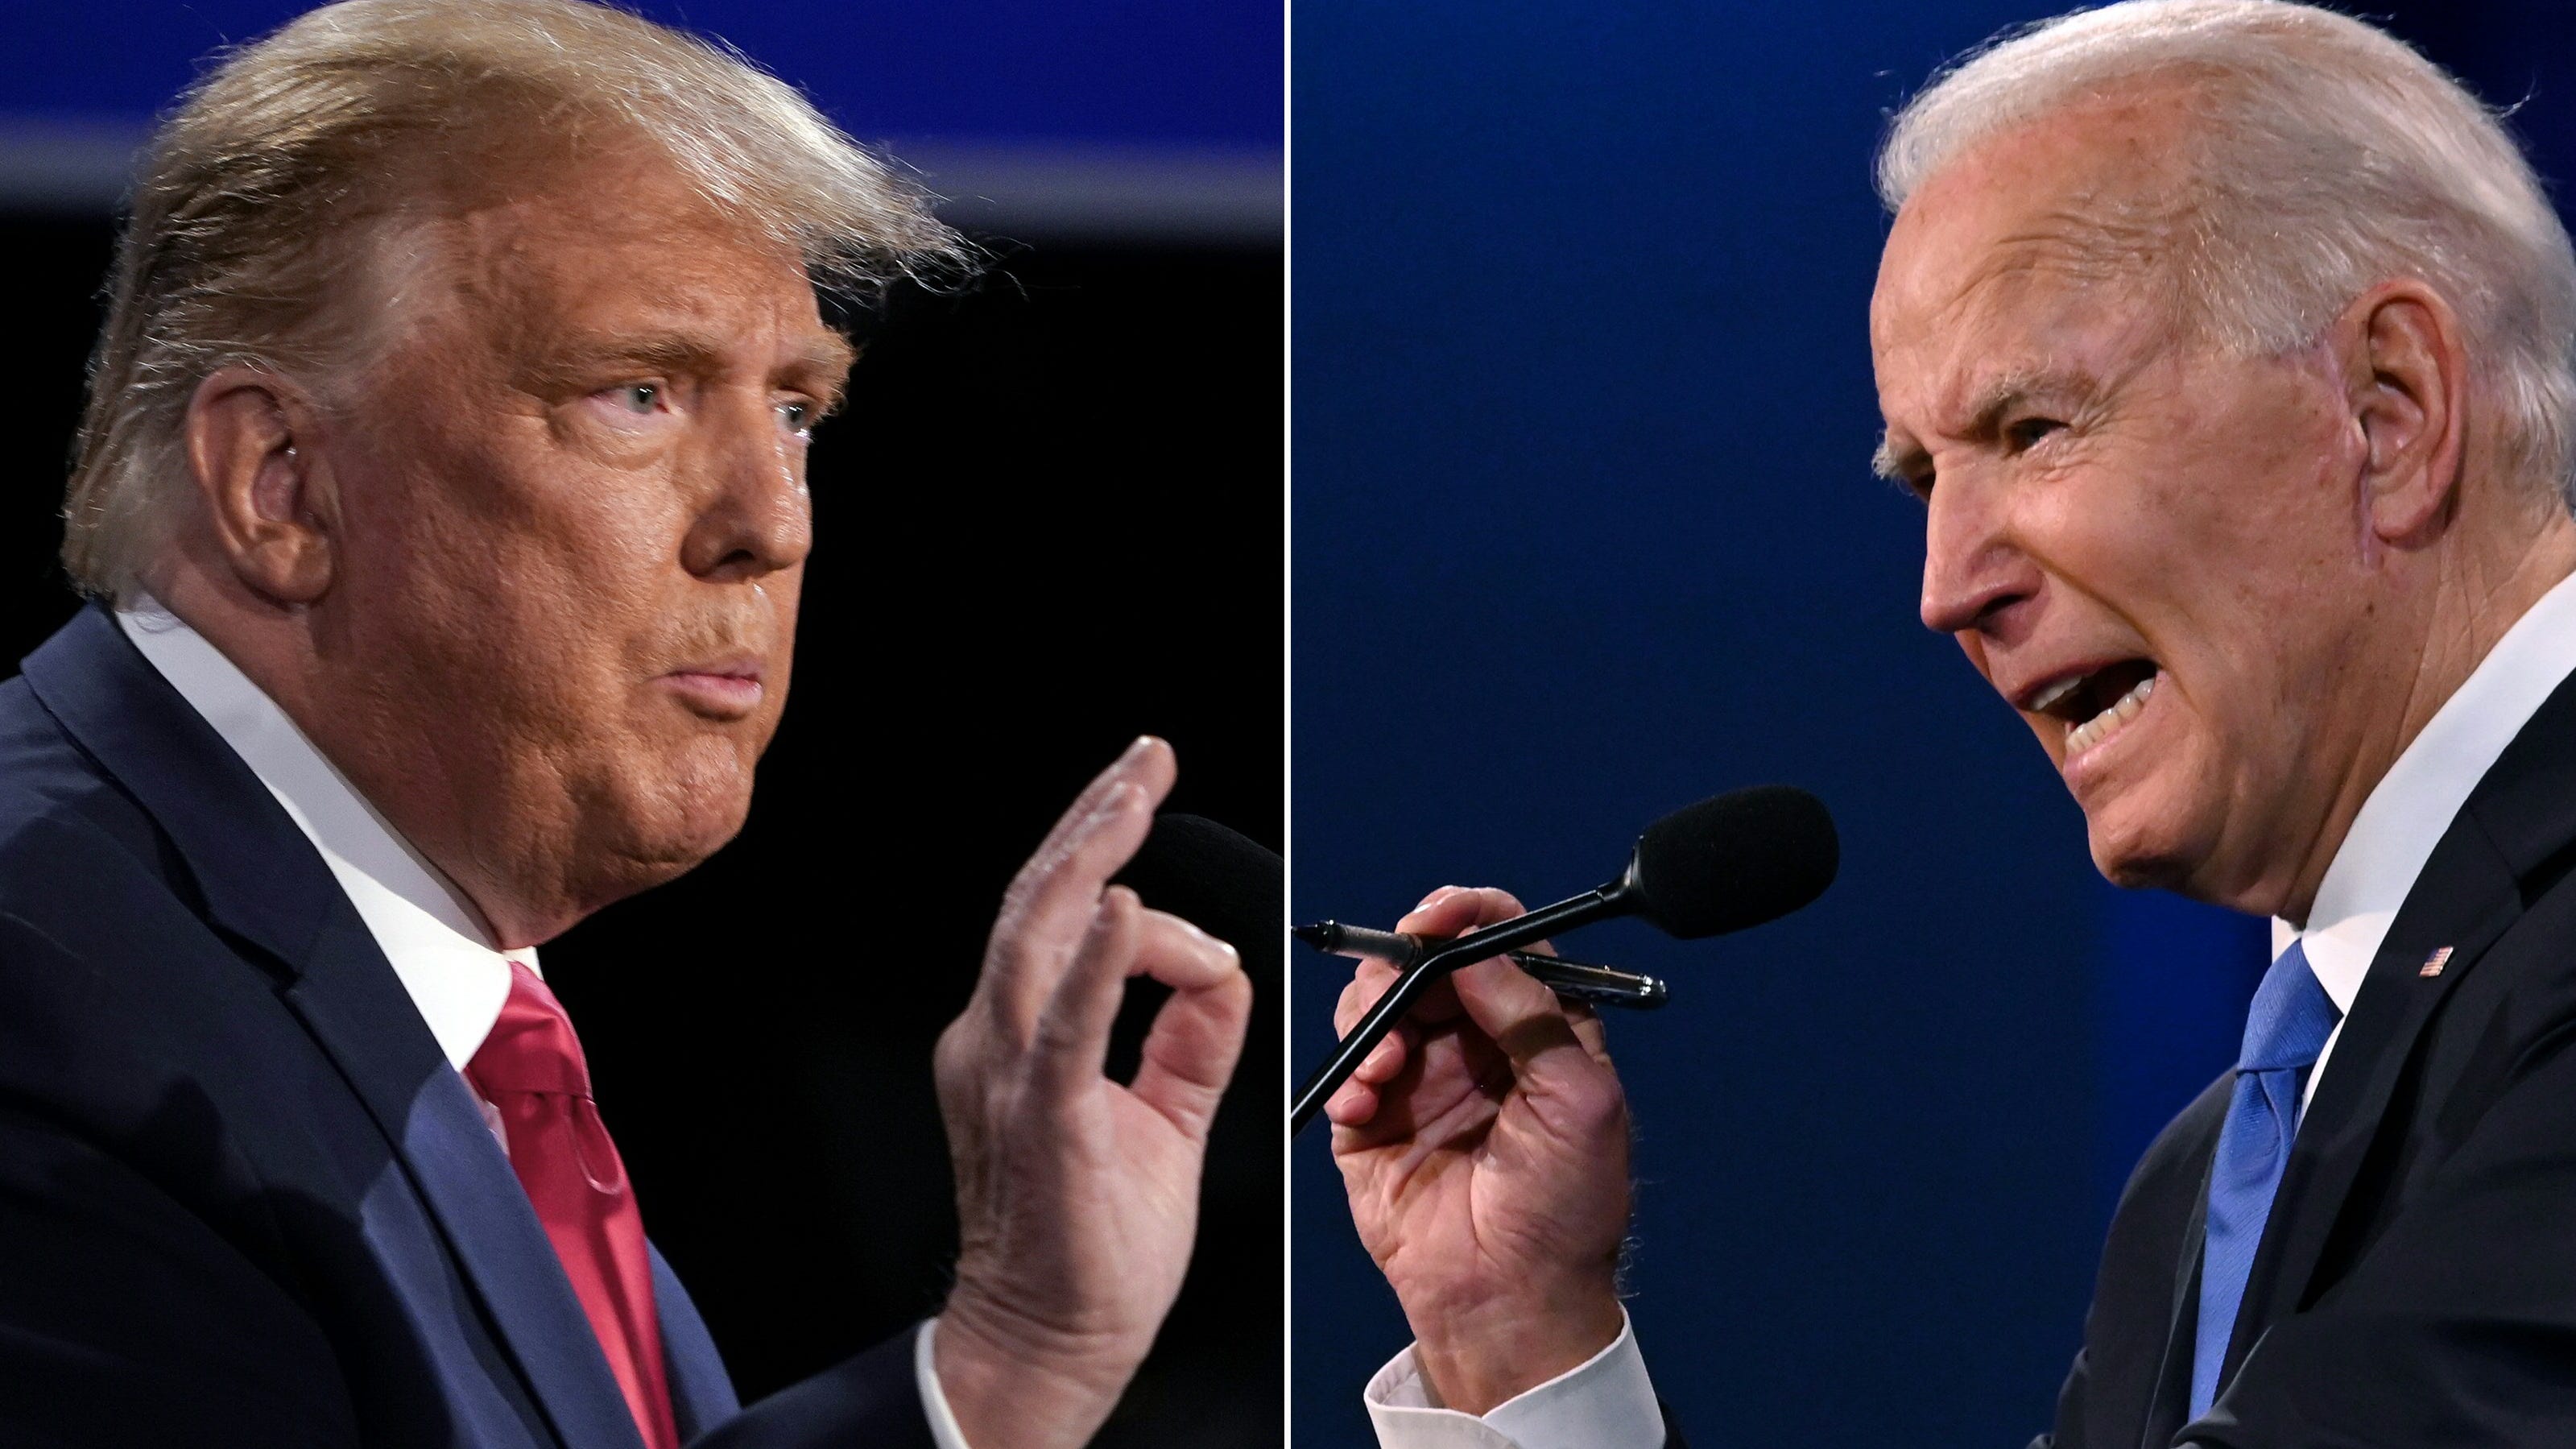 Presidential debate Trump and Biden campaigns both say they won